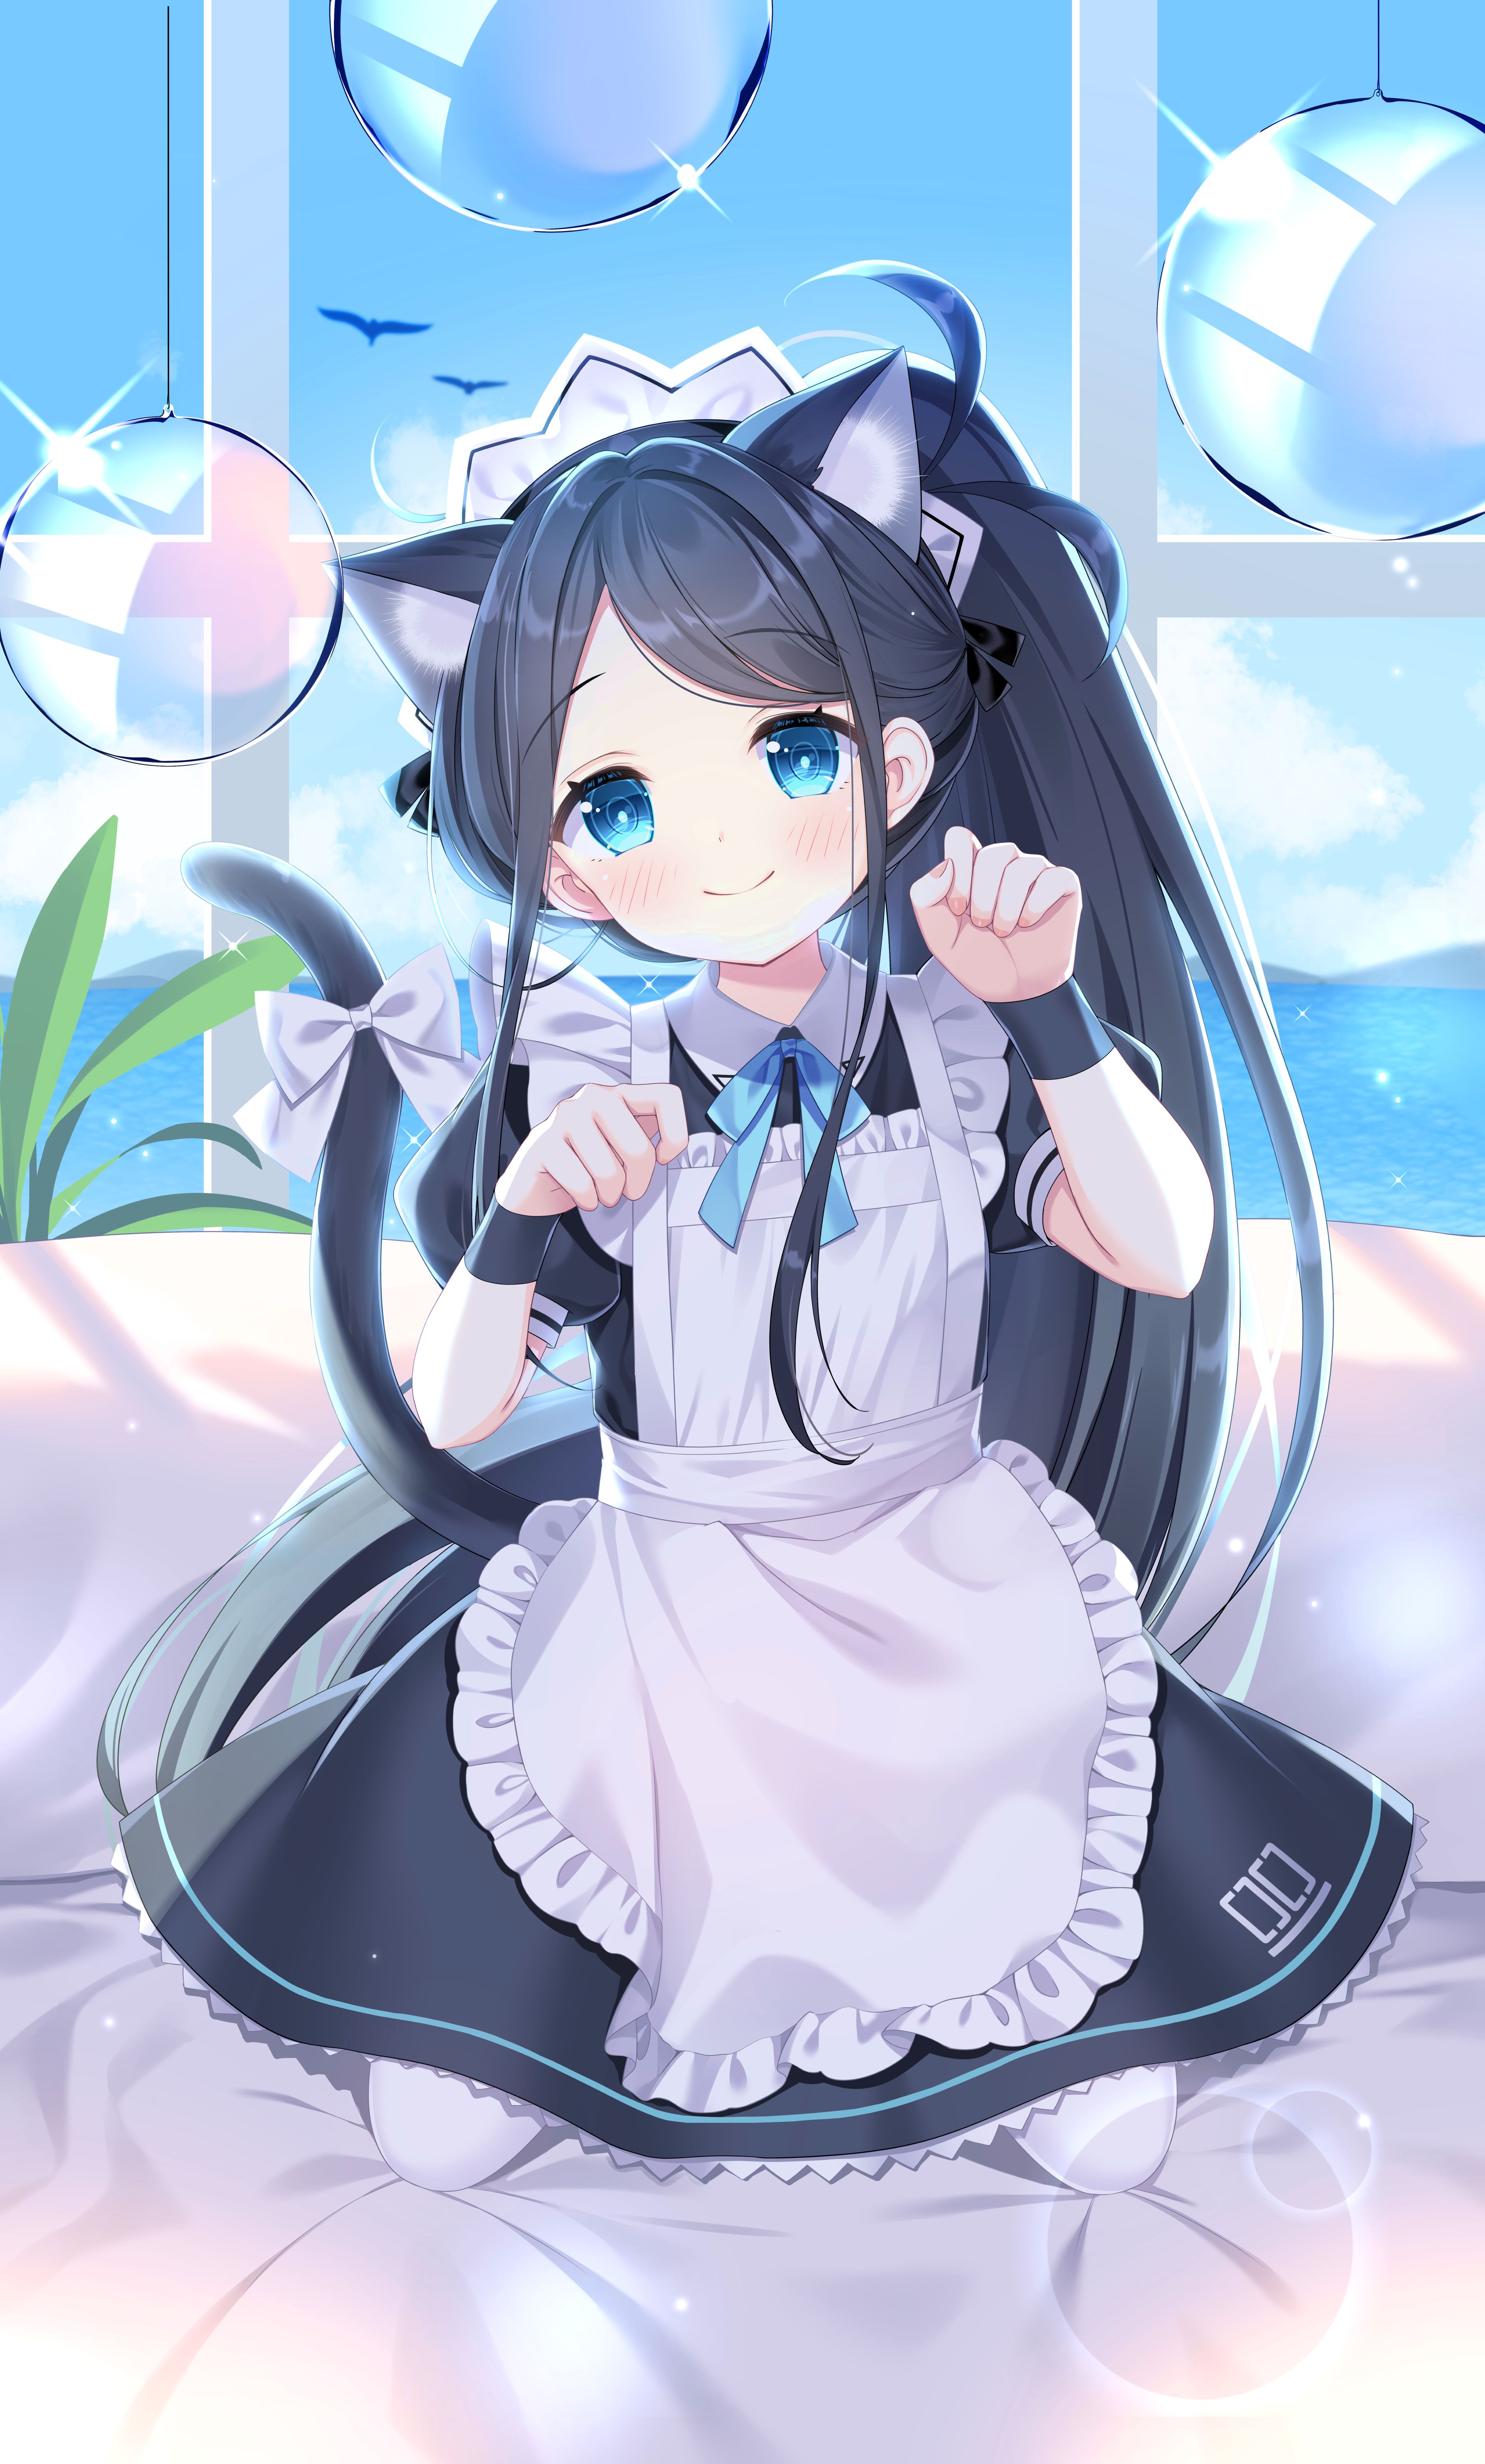 Anime 3615x6000 anime anime girls maid blue eyes Tendou Alice Blue Archive anime games cat girl fan art portrait display maid outfit smiling looking at viewer blushing cat ears cat tail closed mouth long hair bubbles leaves bow tie frills window water sky clouds ponytail stars